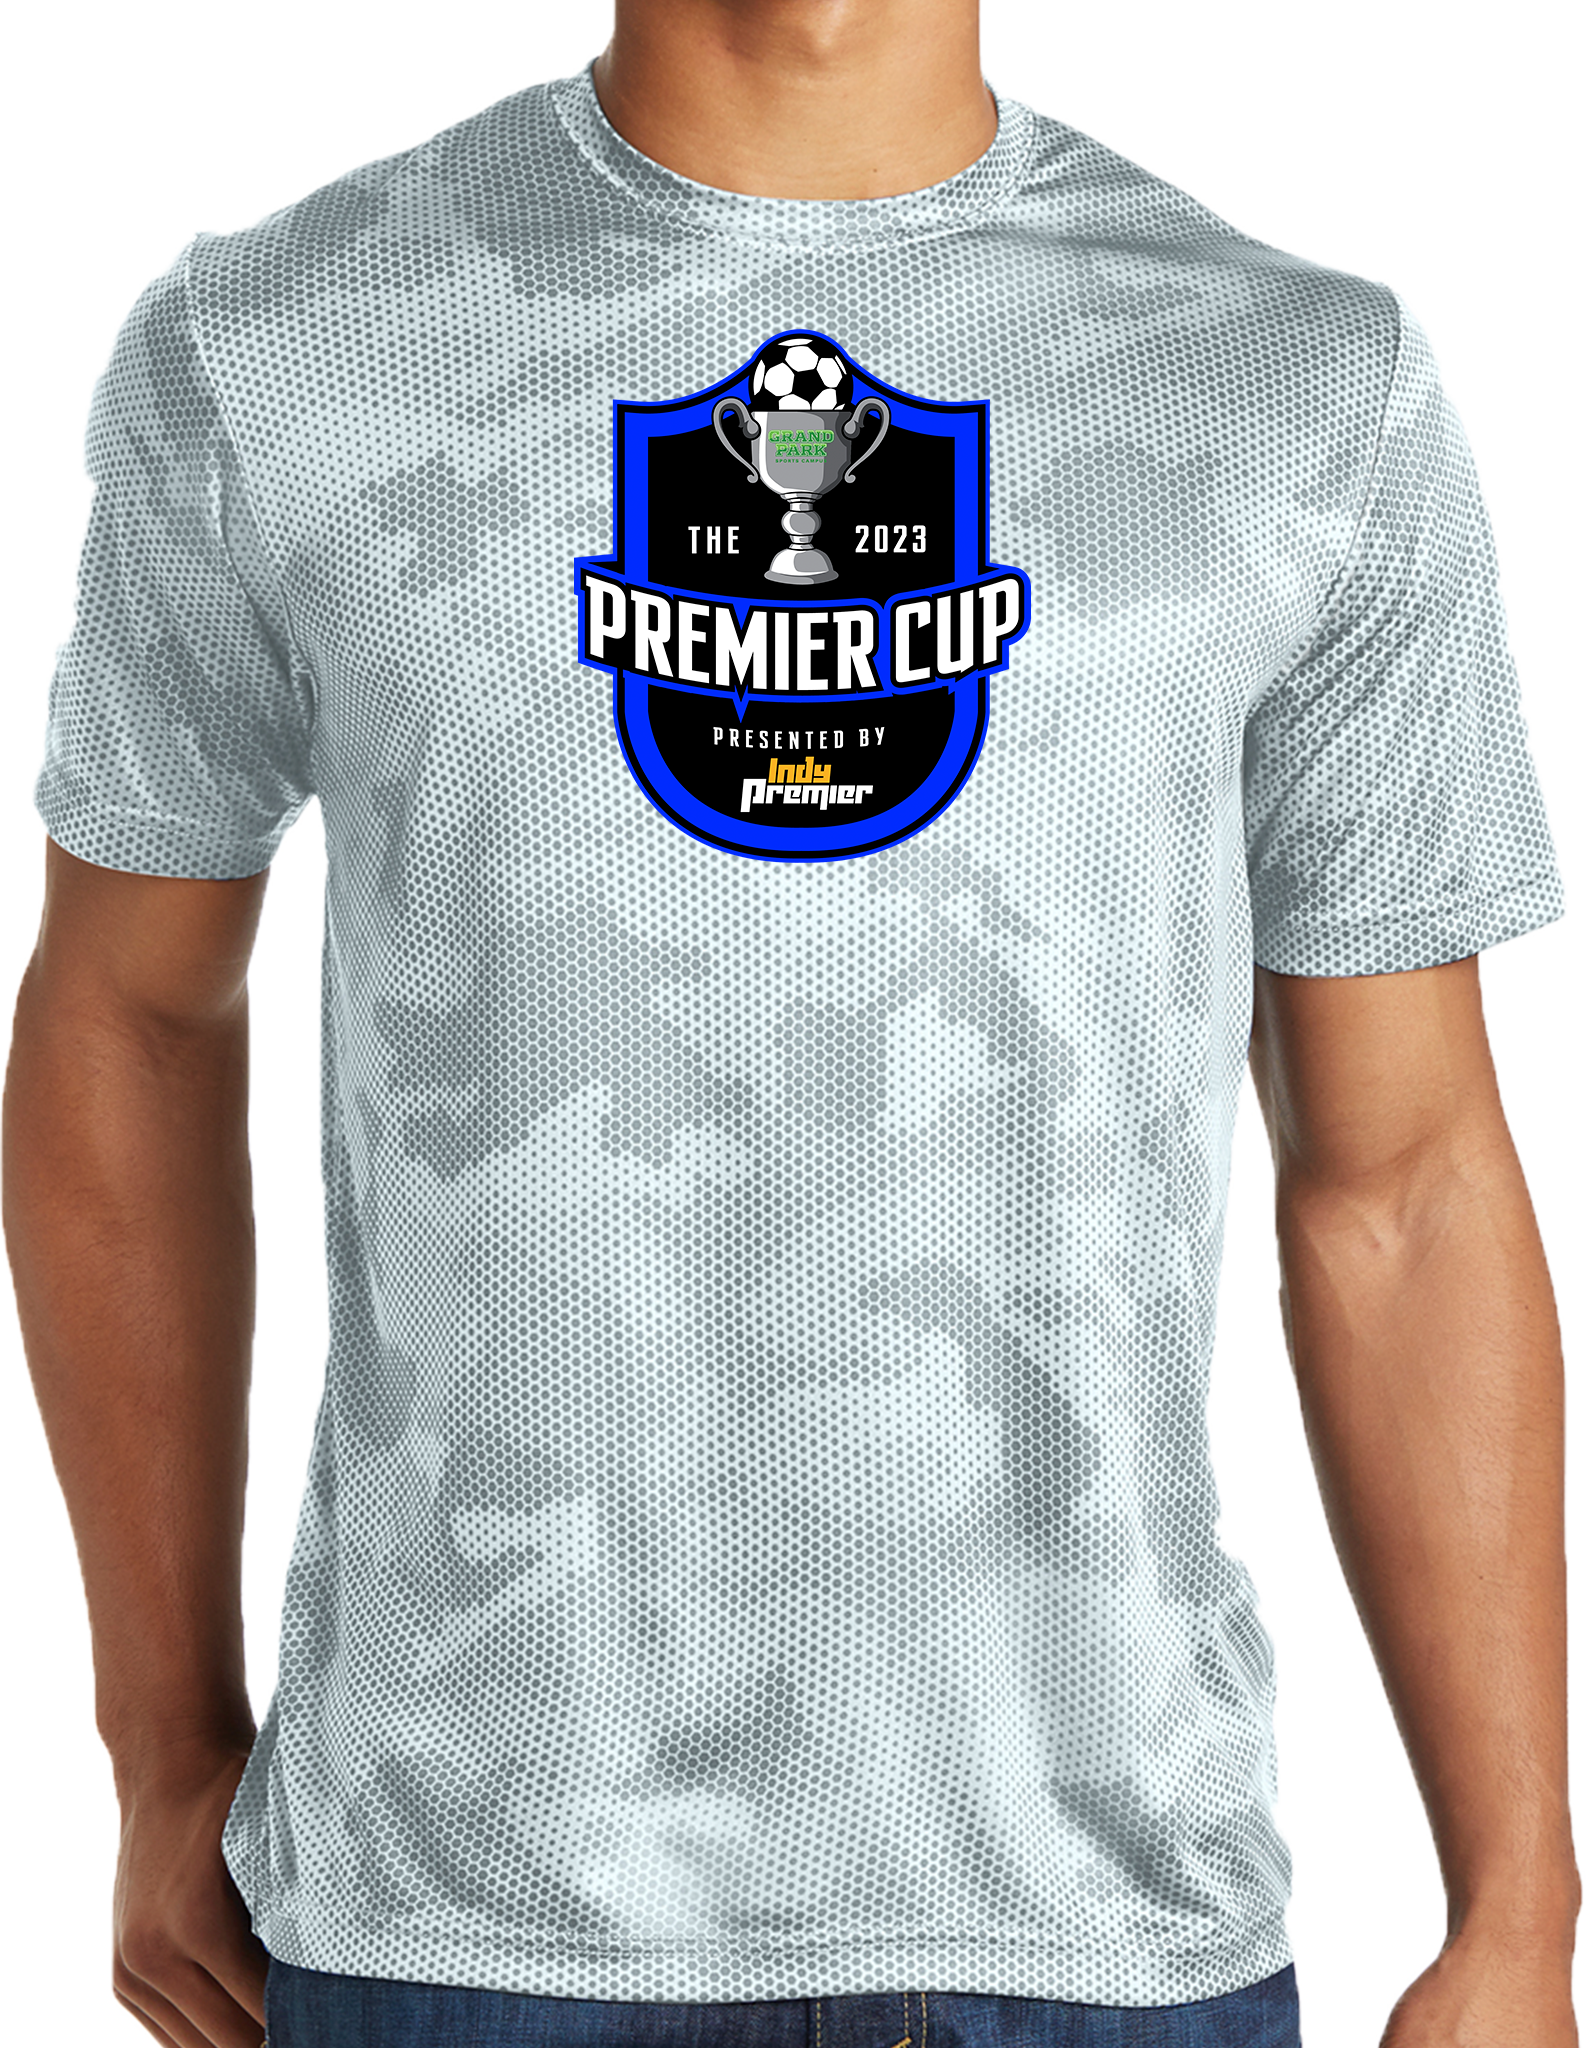 PERFORMANCE SHIRTS - 2023 The Premier Cup presented by Indy Premier